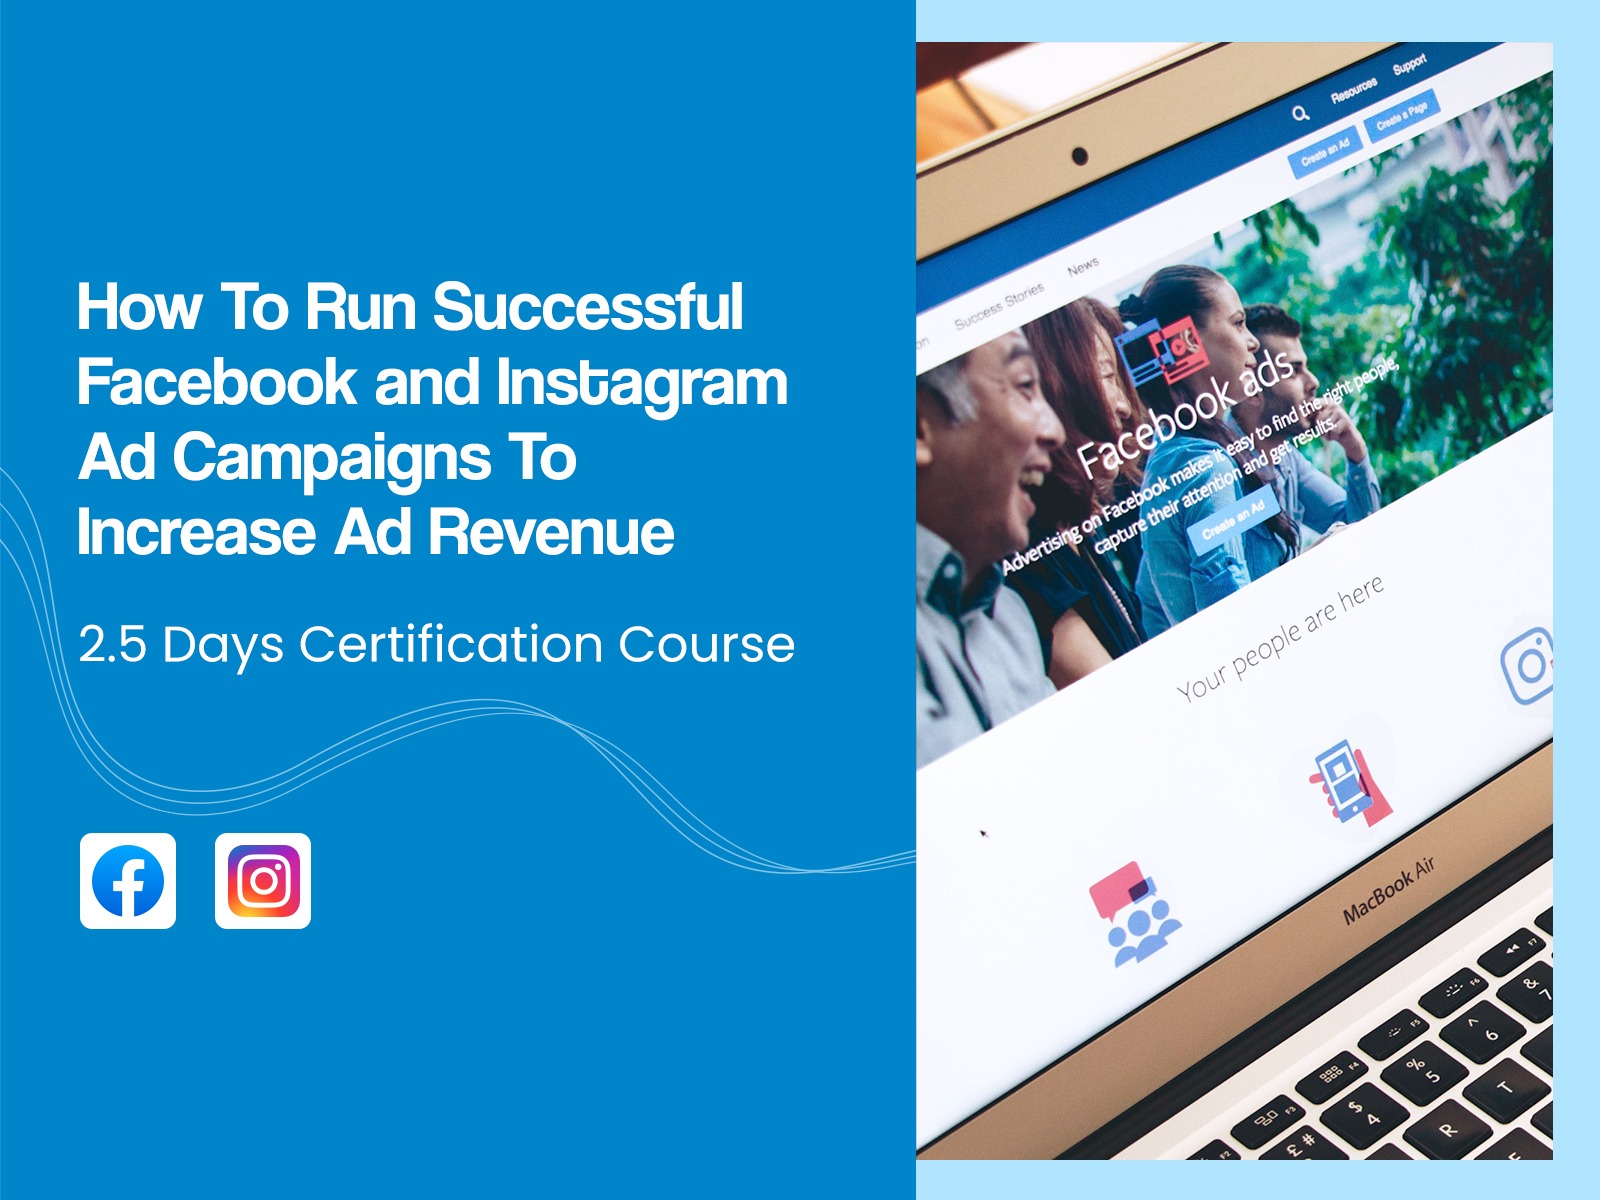 How To Run Successful Facebook and Instagram Ad Campaigns To Increase Ad Revenue